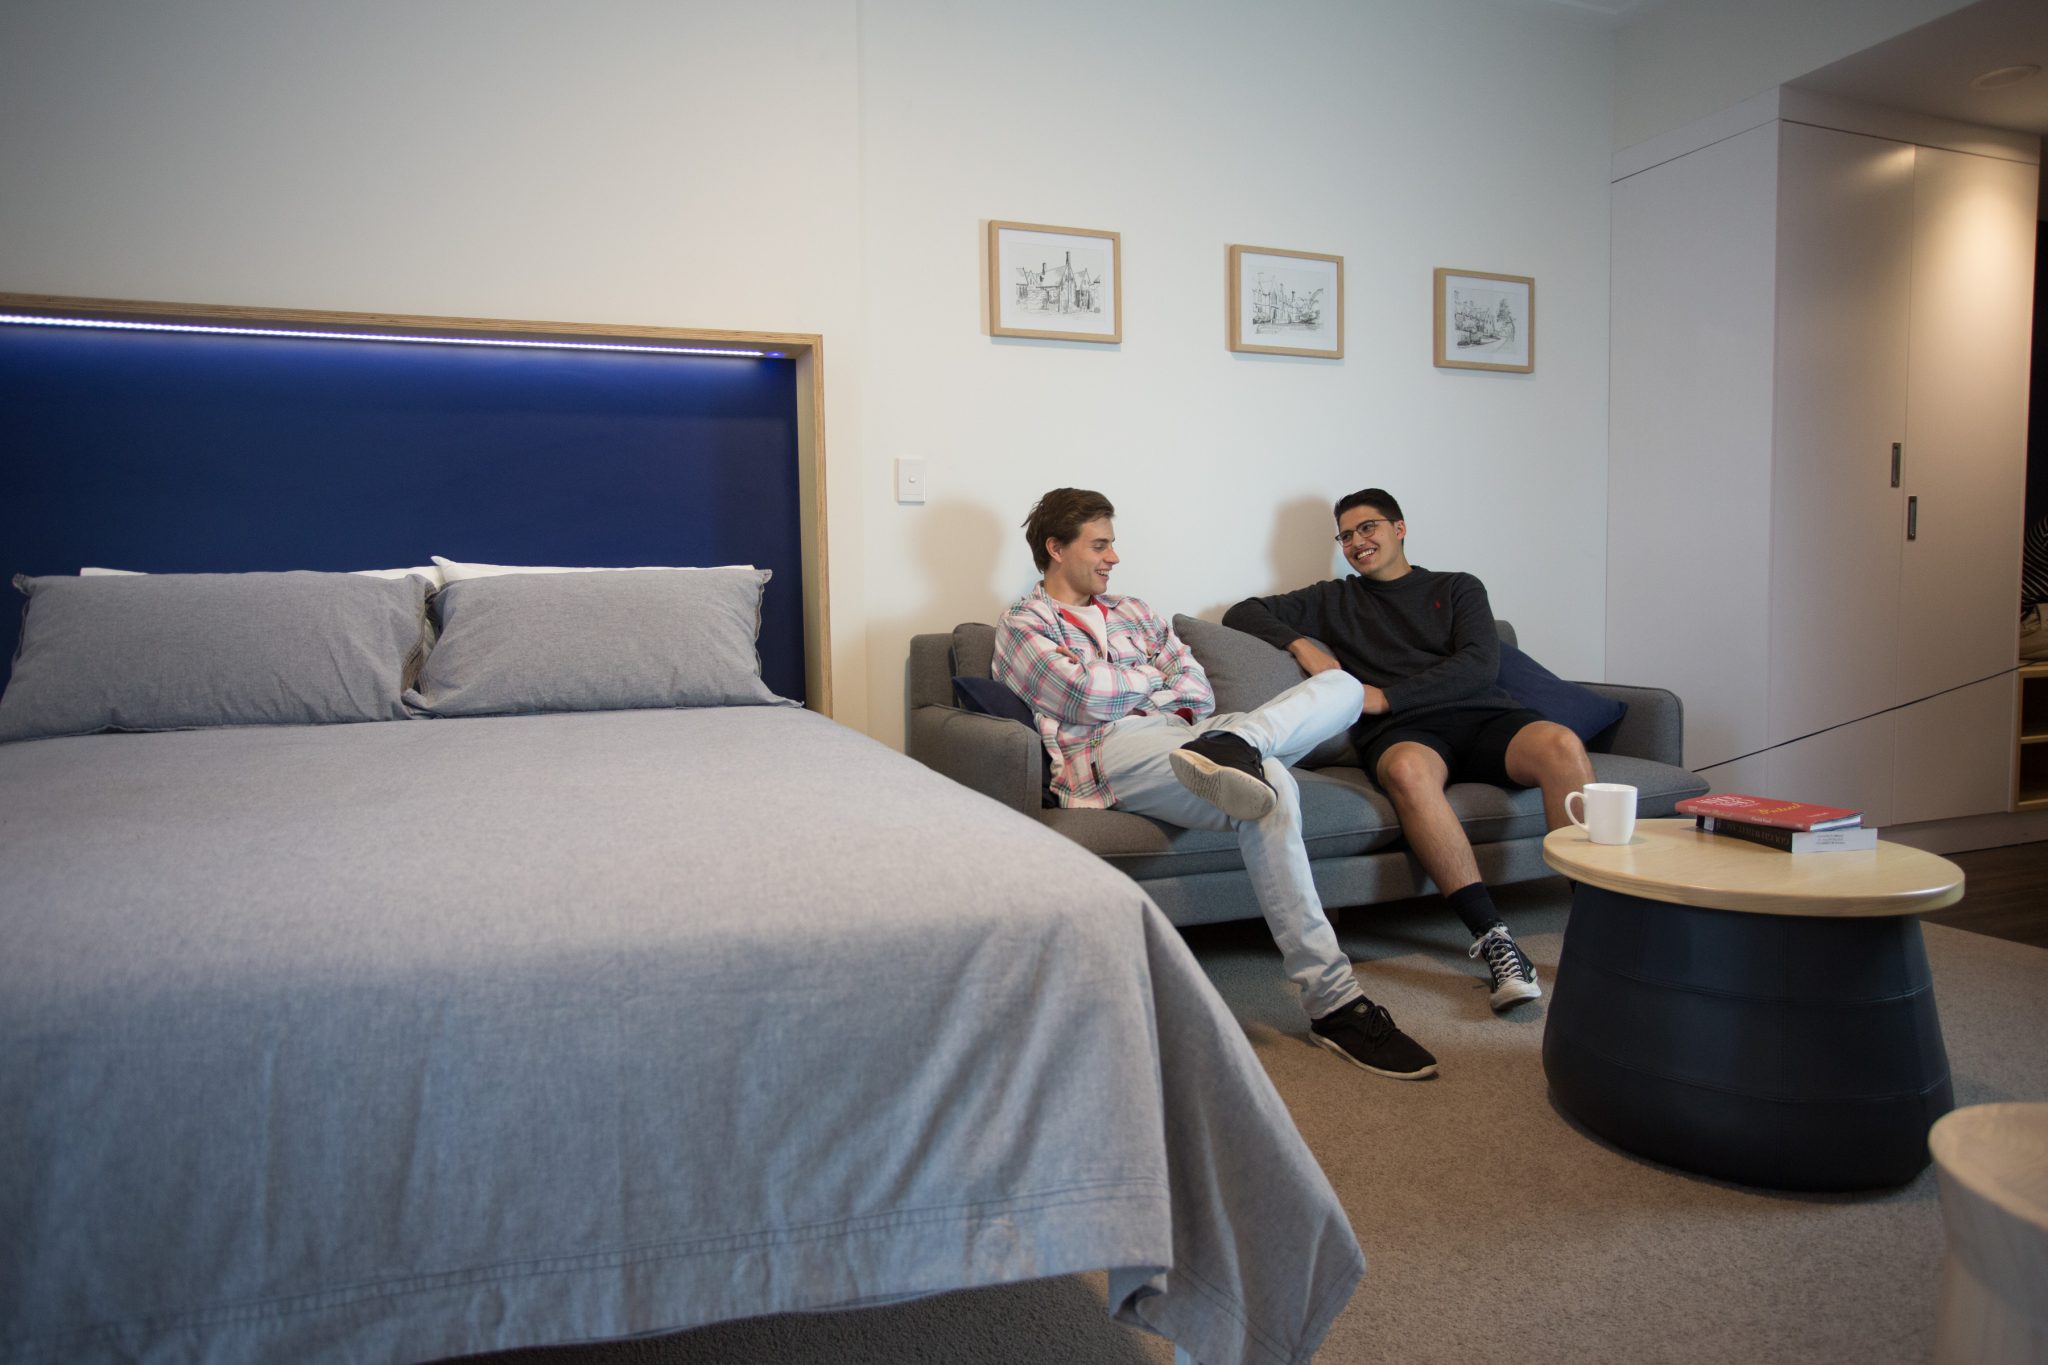 Generally speaking there are three standards of Undergraduate rooms allocated according to seniority and contribution to College: Freshmen rooms in the Arnott/Chapel Court buildings; larger rooms in the heritage buildings; and rooms with ensuite bathrooms and air-conditioning in the new Ivan Head Building. Each room is furnished with a bed, desk, desk chair and wardrobe. Other small items of furniture may be brought into College except in the Head Building which are fully furnished. All rooms have unlimited WiFi connectivity. Residence over University breaks is available upon application.